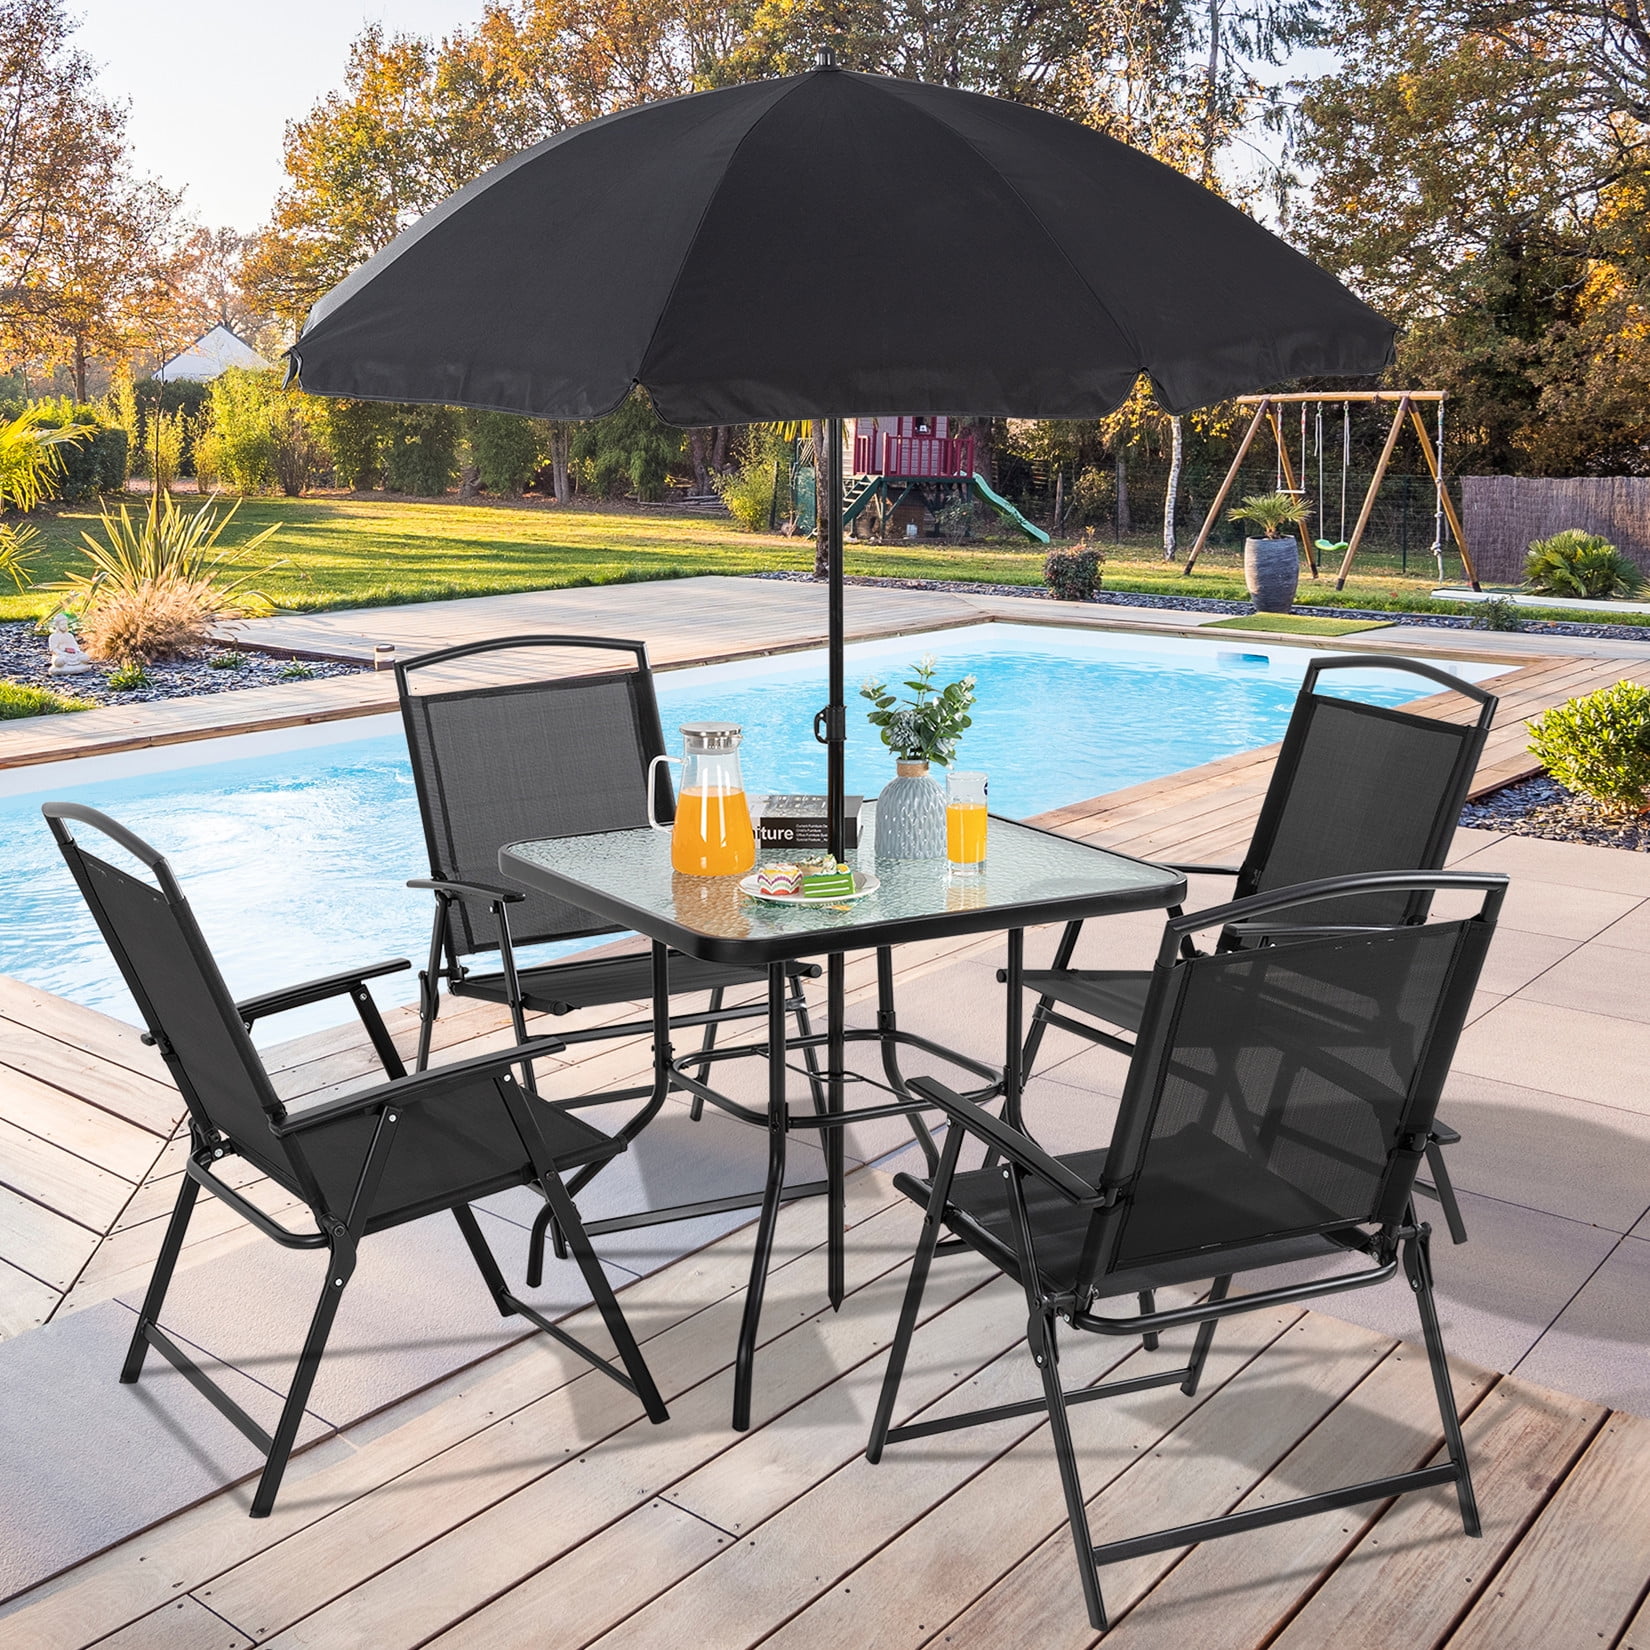 Garden Patio Furniture Set 4 Seater Dining Set Parasol Glass Table & Chairs NEW 